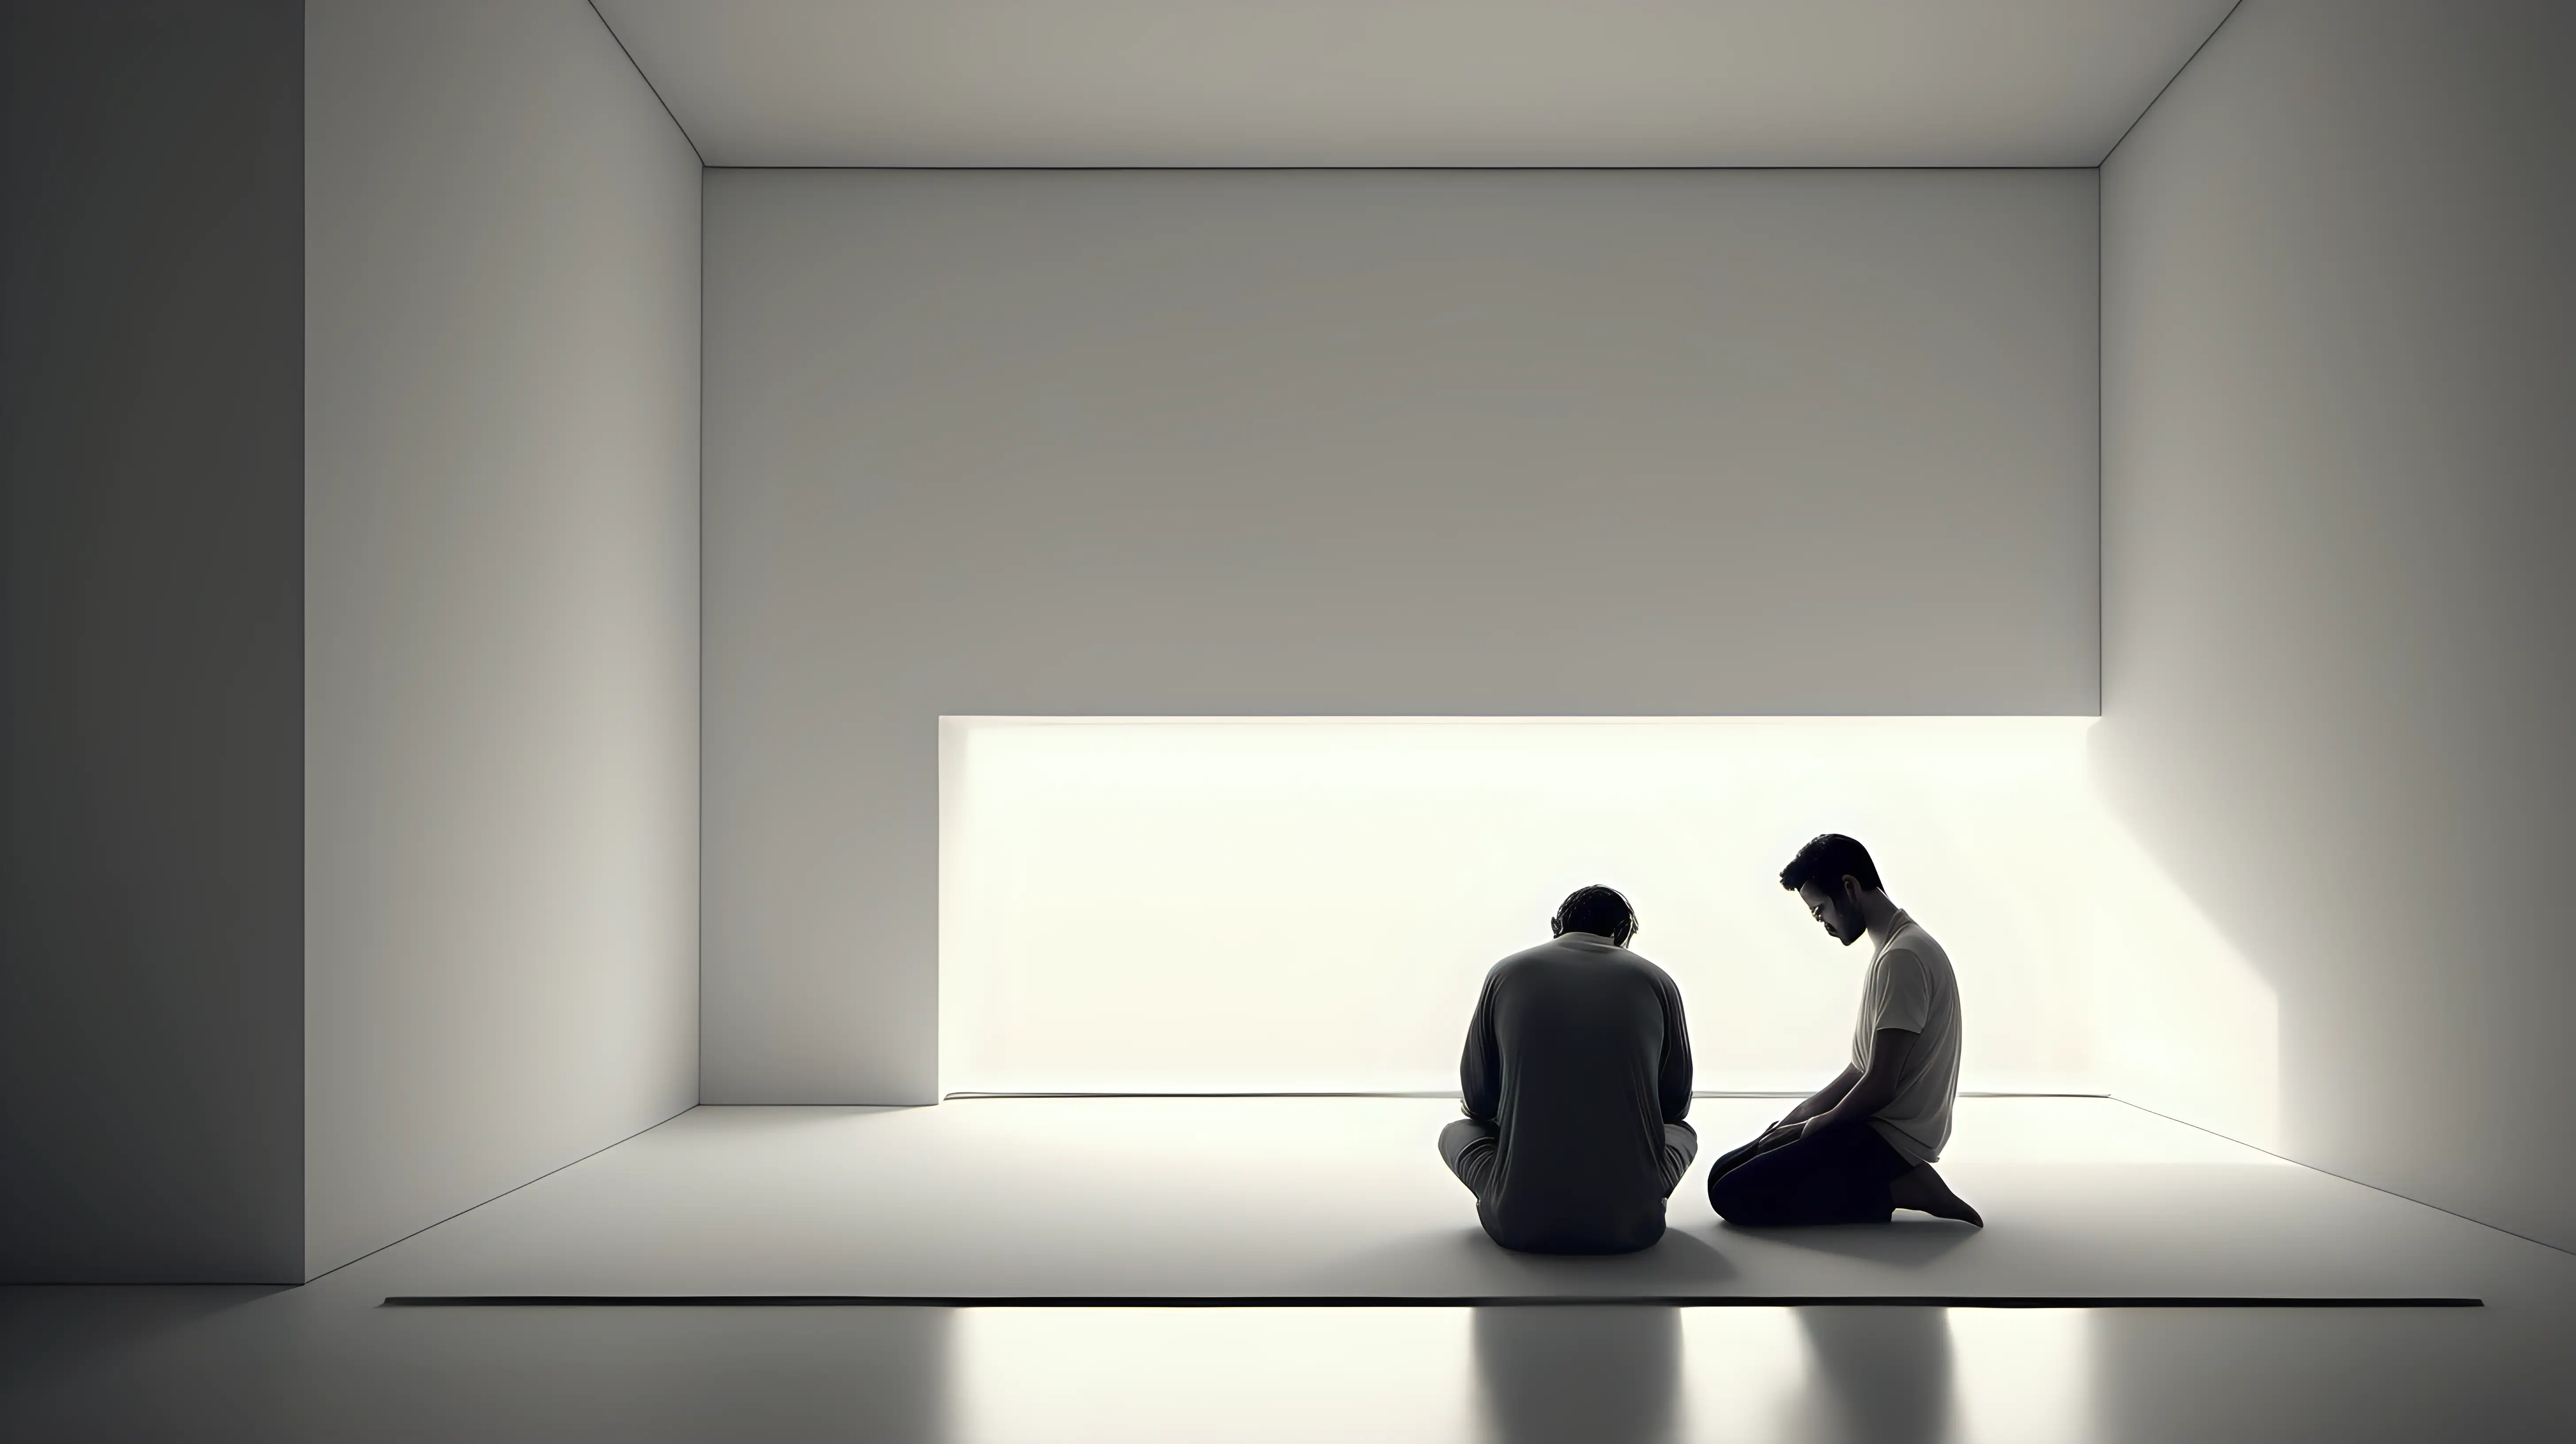 Supportive Moment Intimate Bond Between Two Men in Minimalist Setting